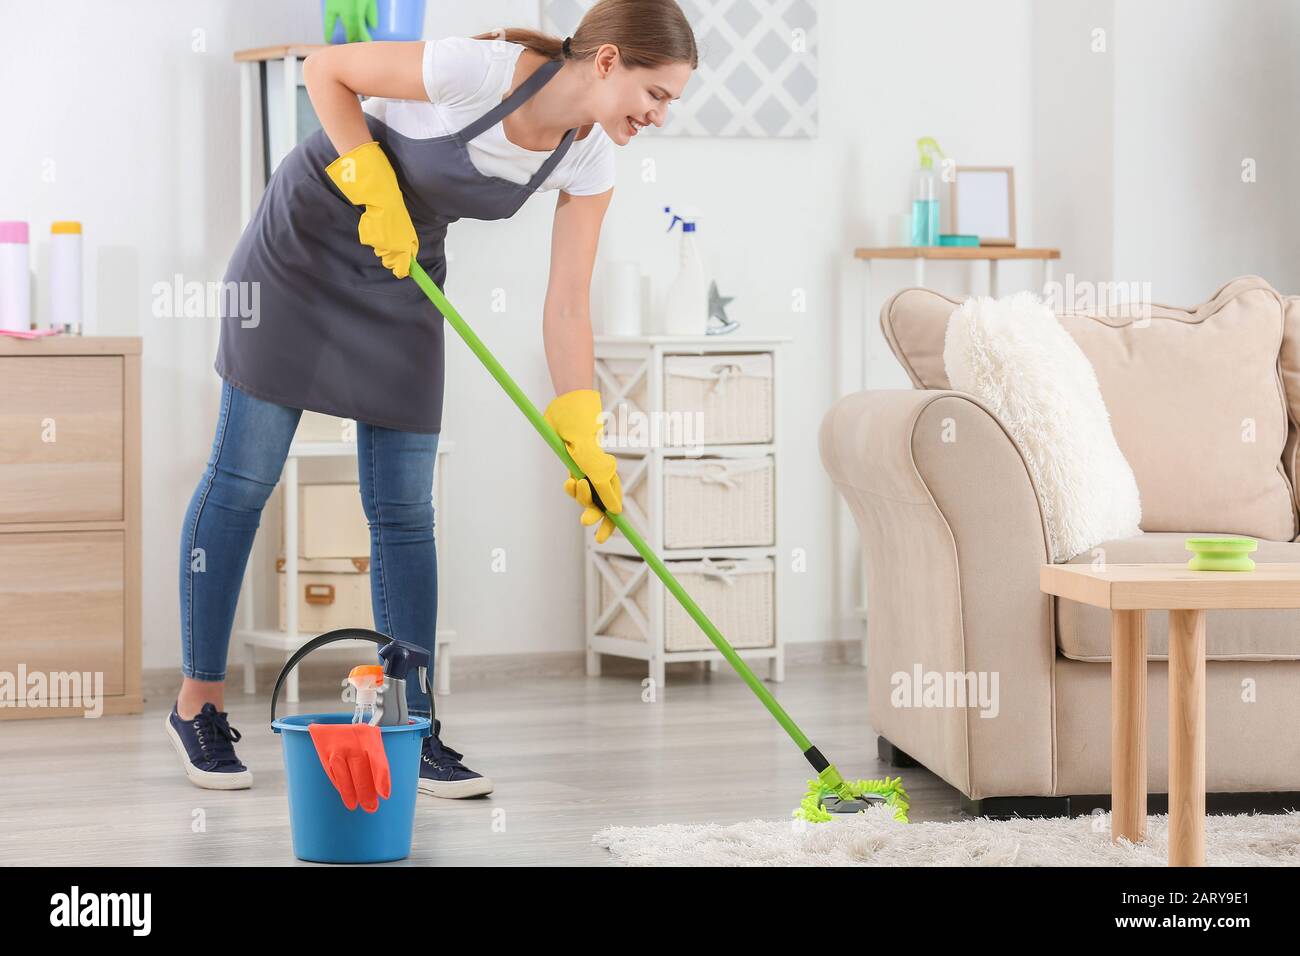 Female janitor mopping floor in room Stock Photo